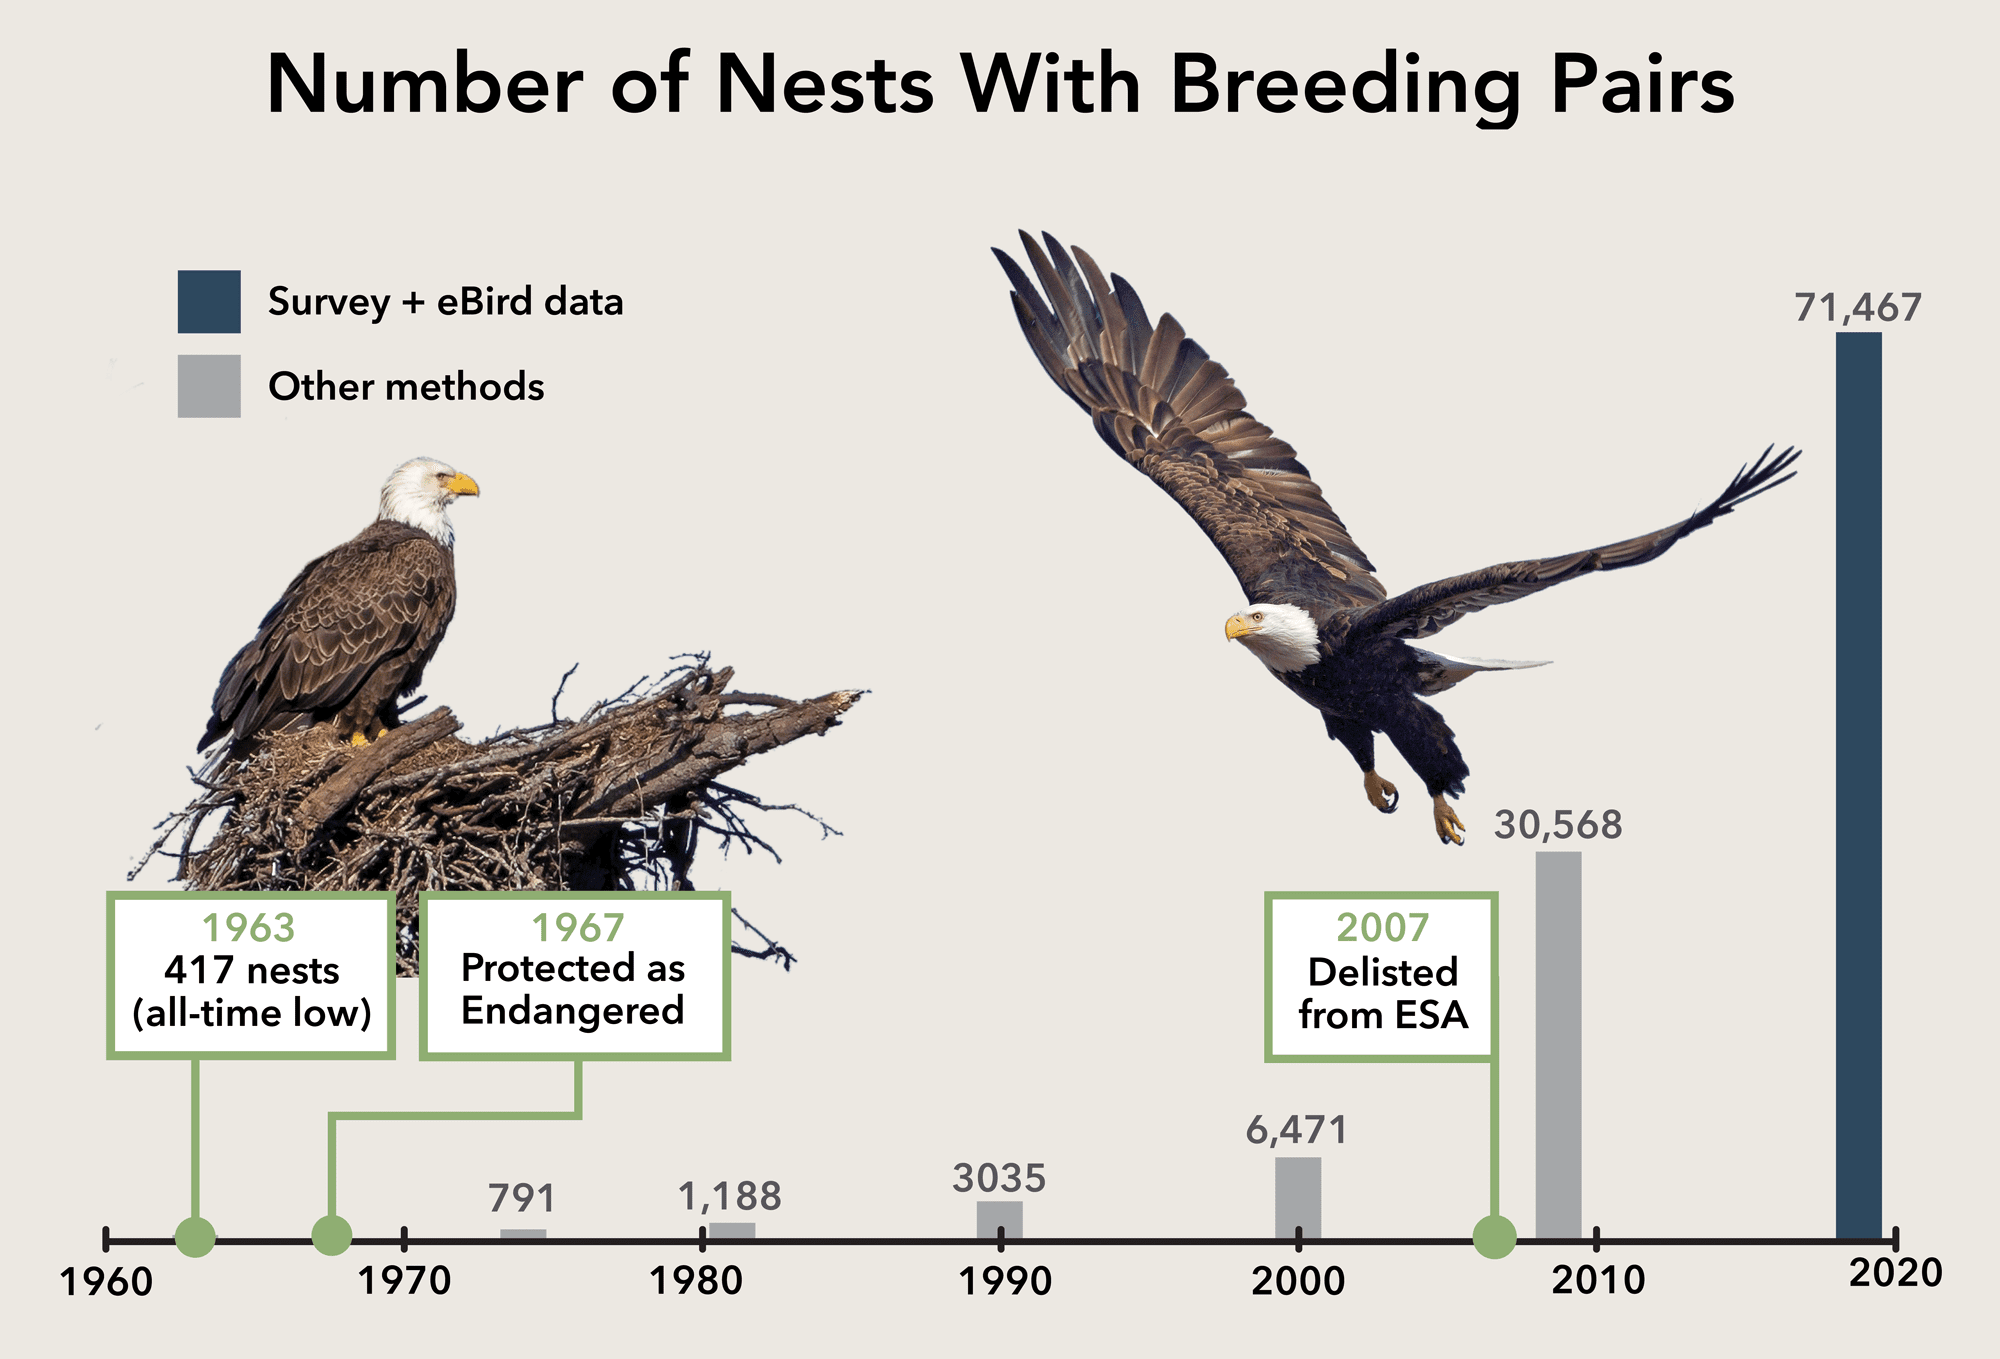 Number of nests with breeding pairs. Photos from Macaulay Library: Bald Eagle on nest by Bill Wood, in flight by Eric Heisey. Graphic by Jillian Ditner.